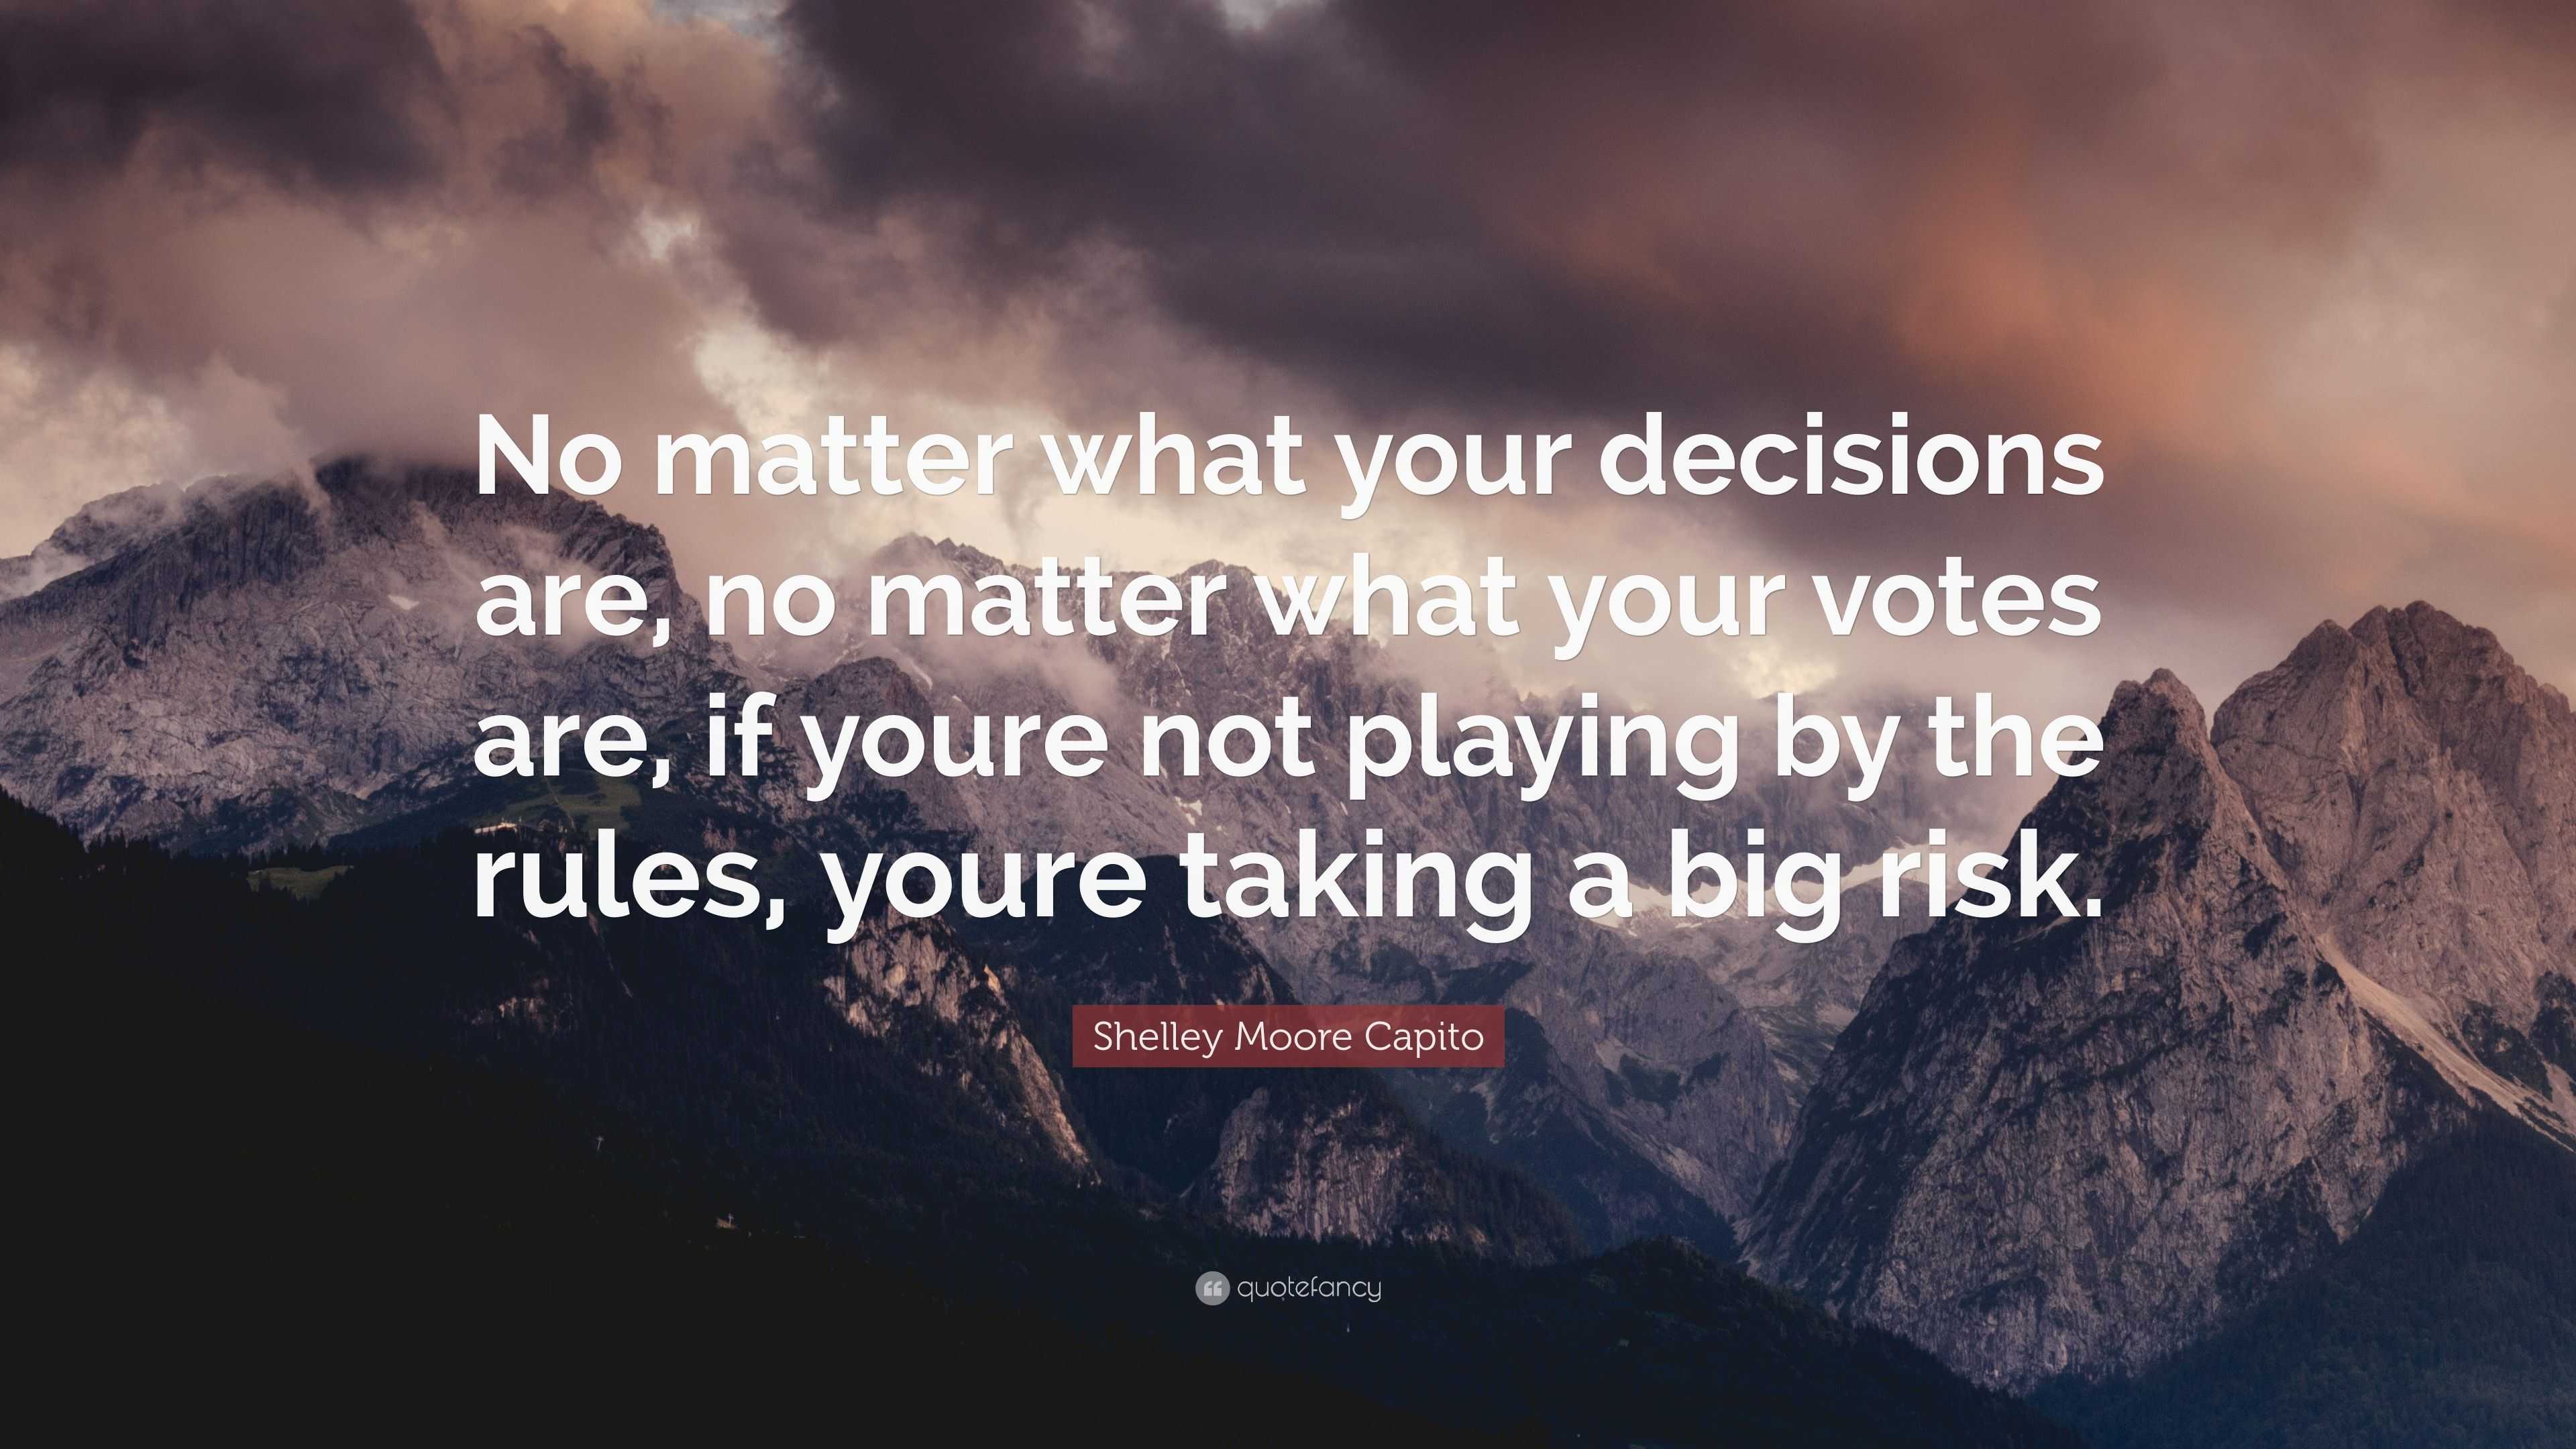 Shelley Moore Capito Quote: “No matter what your decisions are, no ...